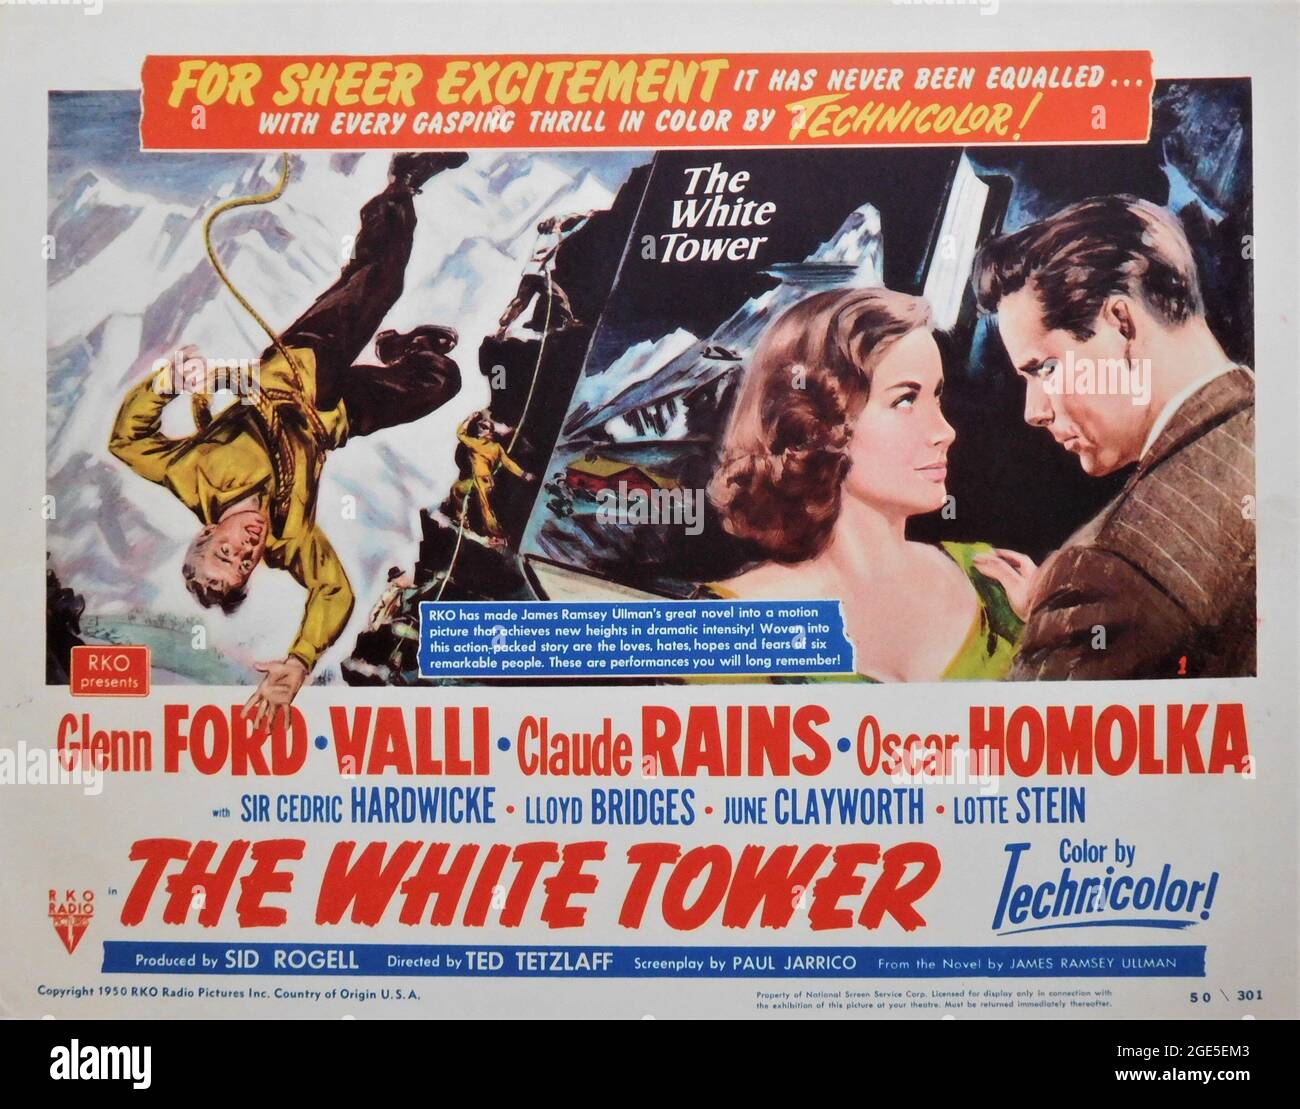 GLENN FORD ALIDA VALLI and CLAUDE RAINS in THE WHITE TOWER 1950 director TED TETZLAFF novel James Ramsey Ullman screenplay Paul Jarrico music Roy Webb assistant director Robert Aldrich RKO Radio Pictures Stock Photo